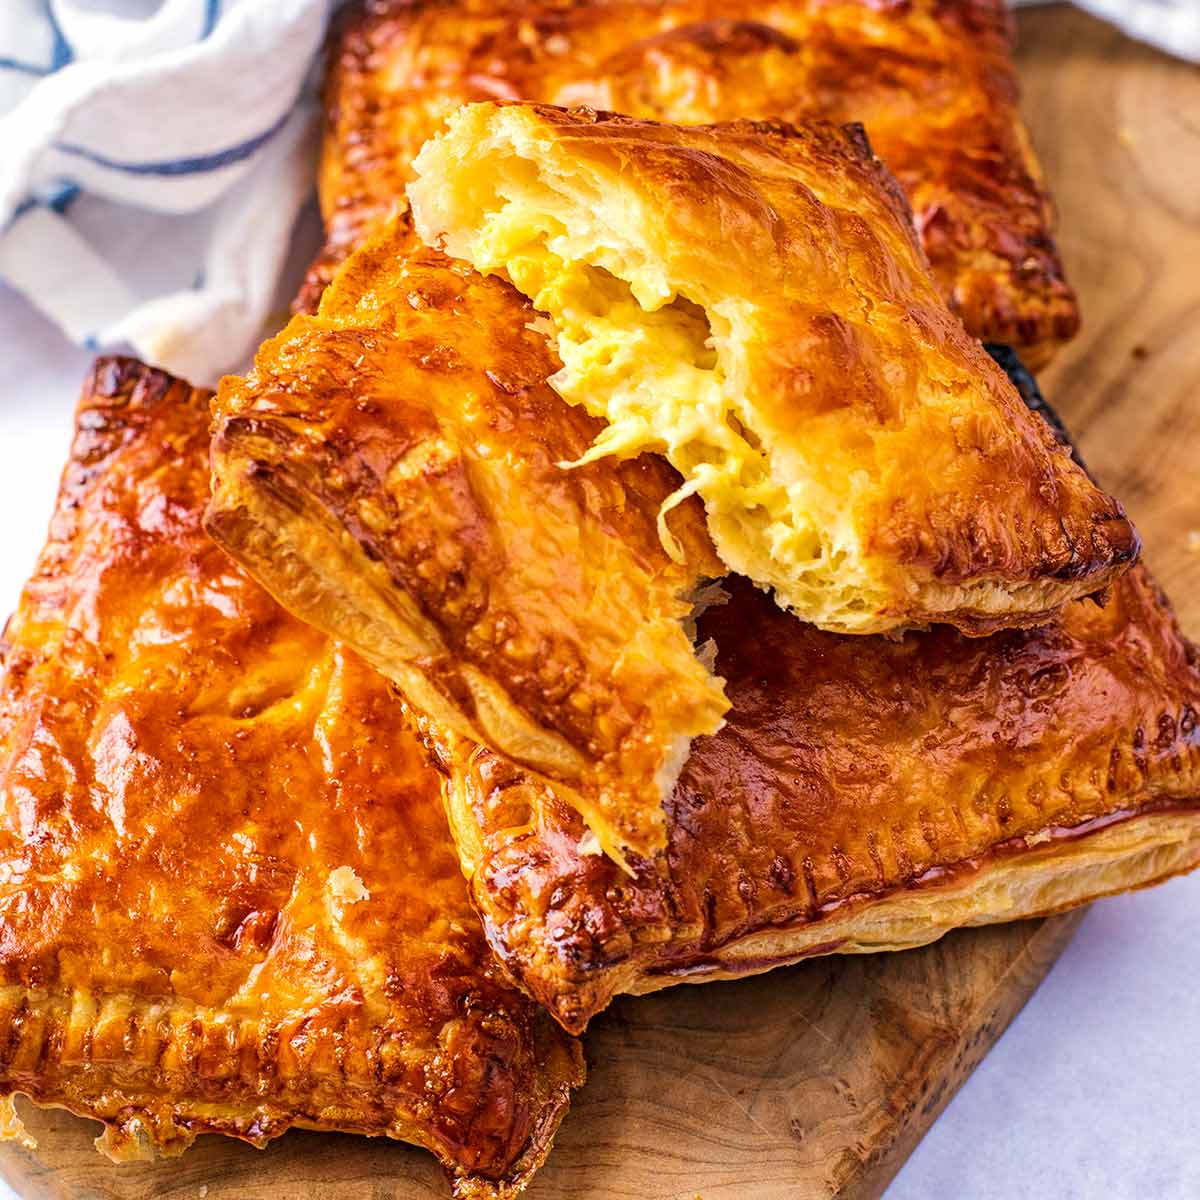 https://hungryhealthyhappy.com/wp-content/uploads/2022/06/cheese-and-onion-pasty-featured.jpg